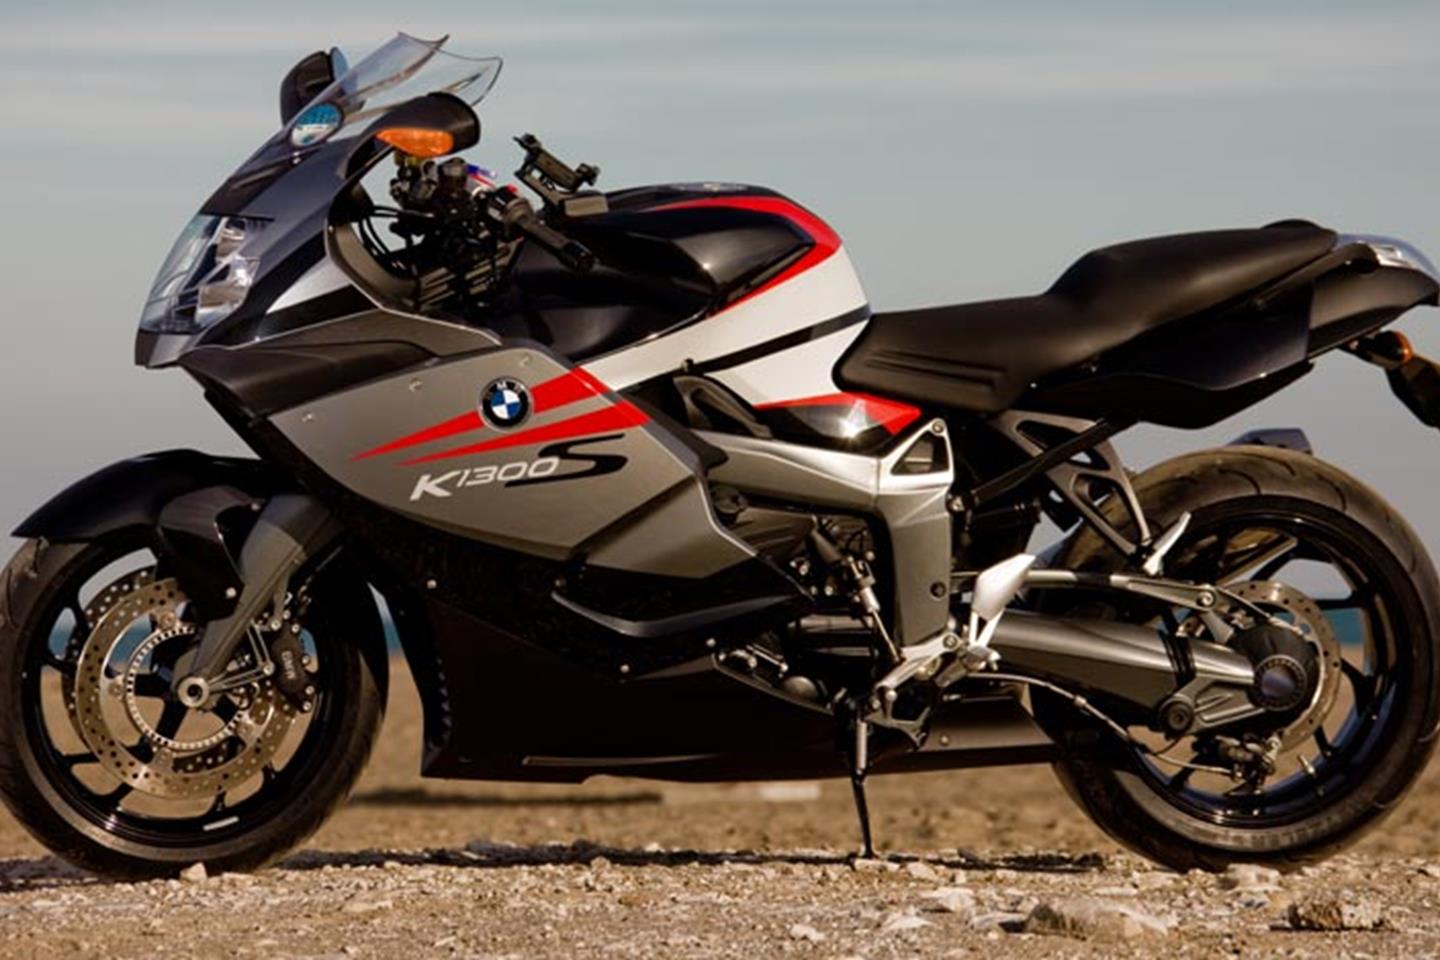 BMW K1300S (2009-2016) Review | Owner & Expert Ratings